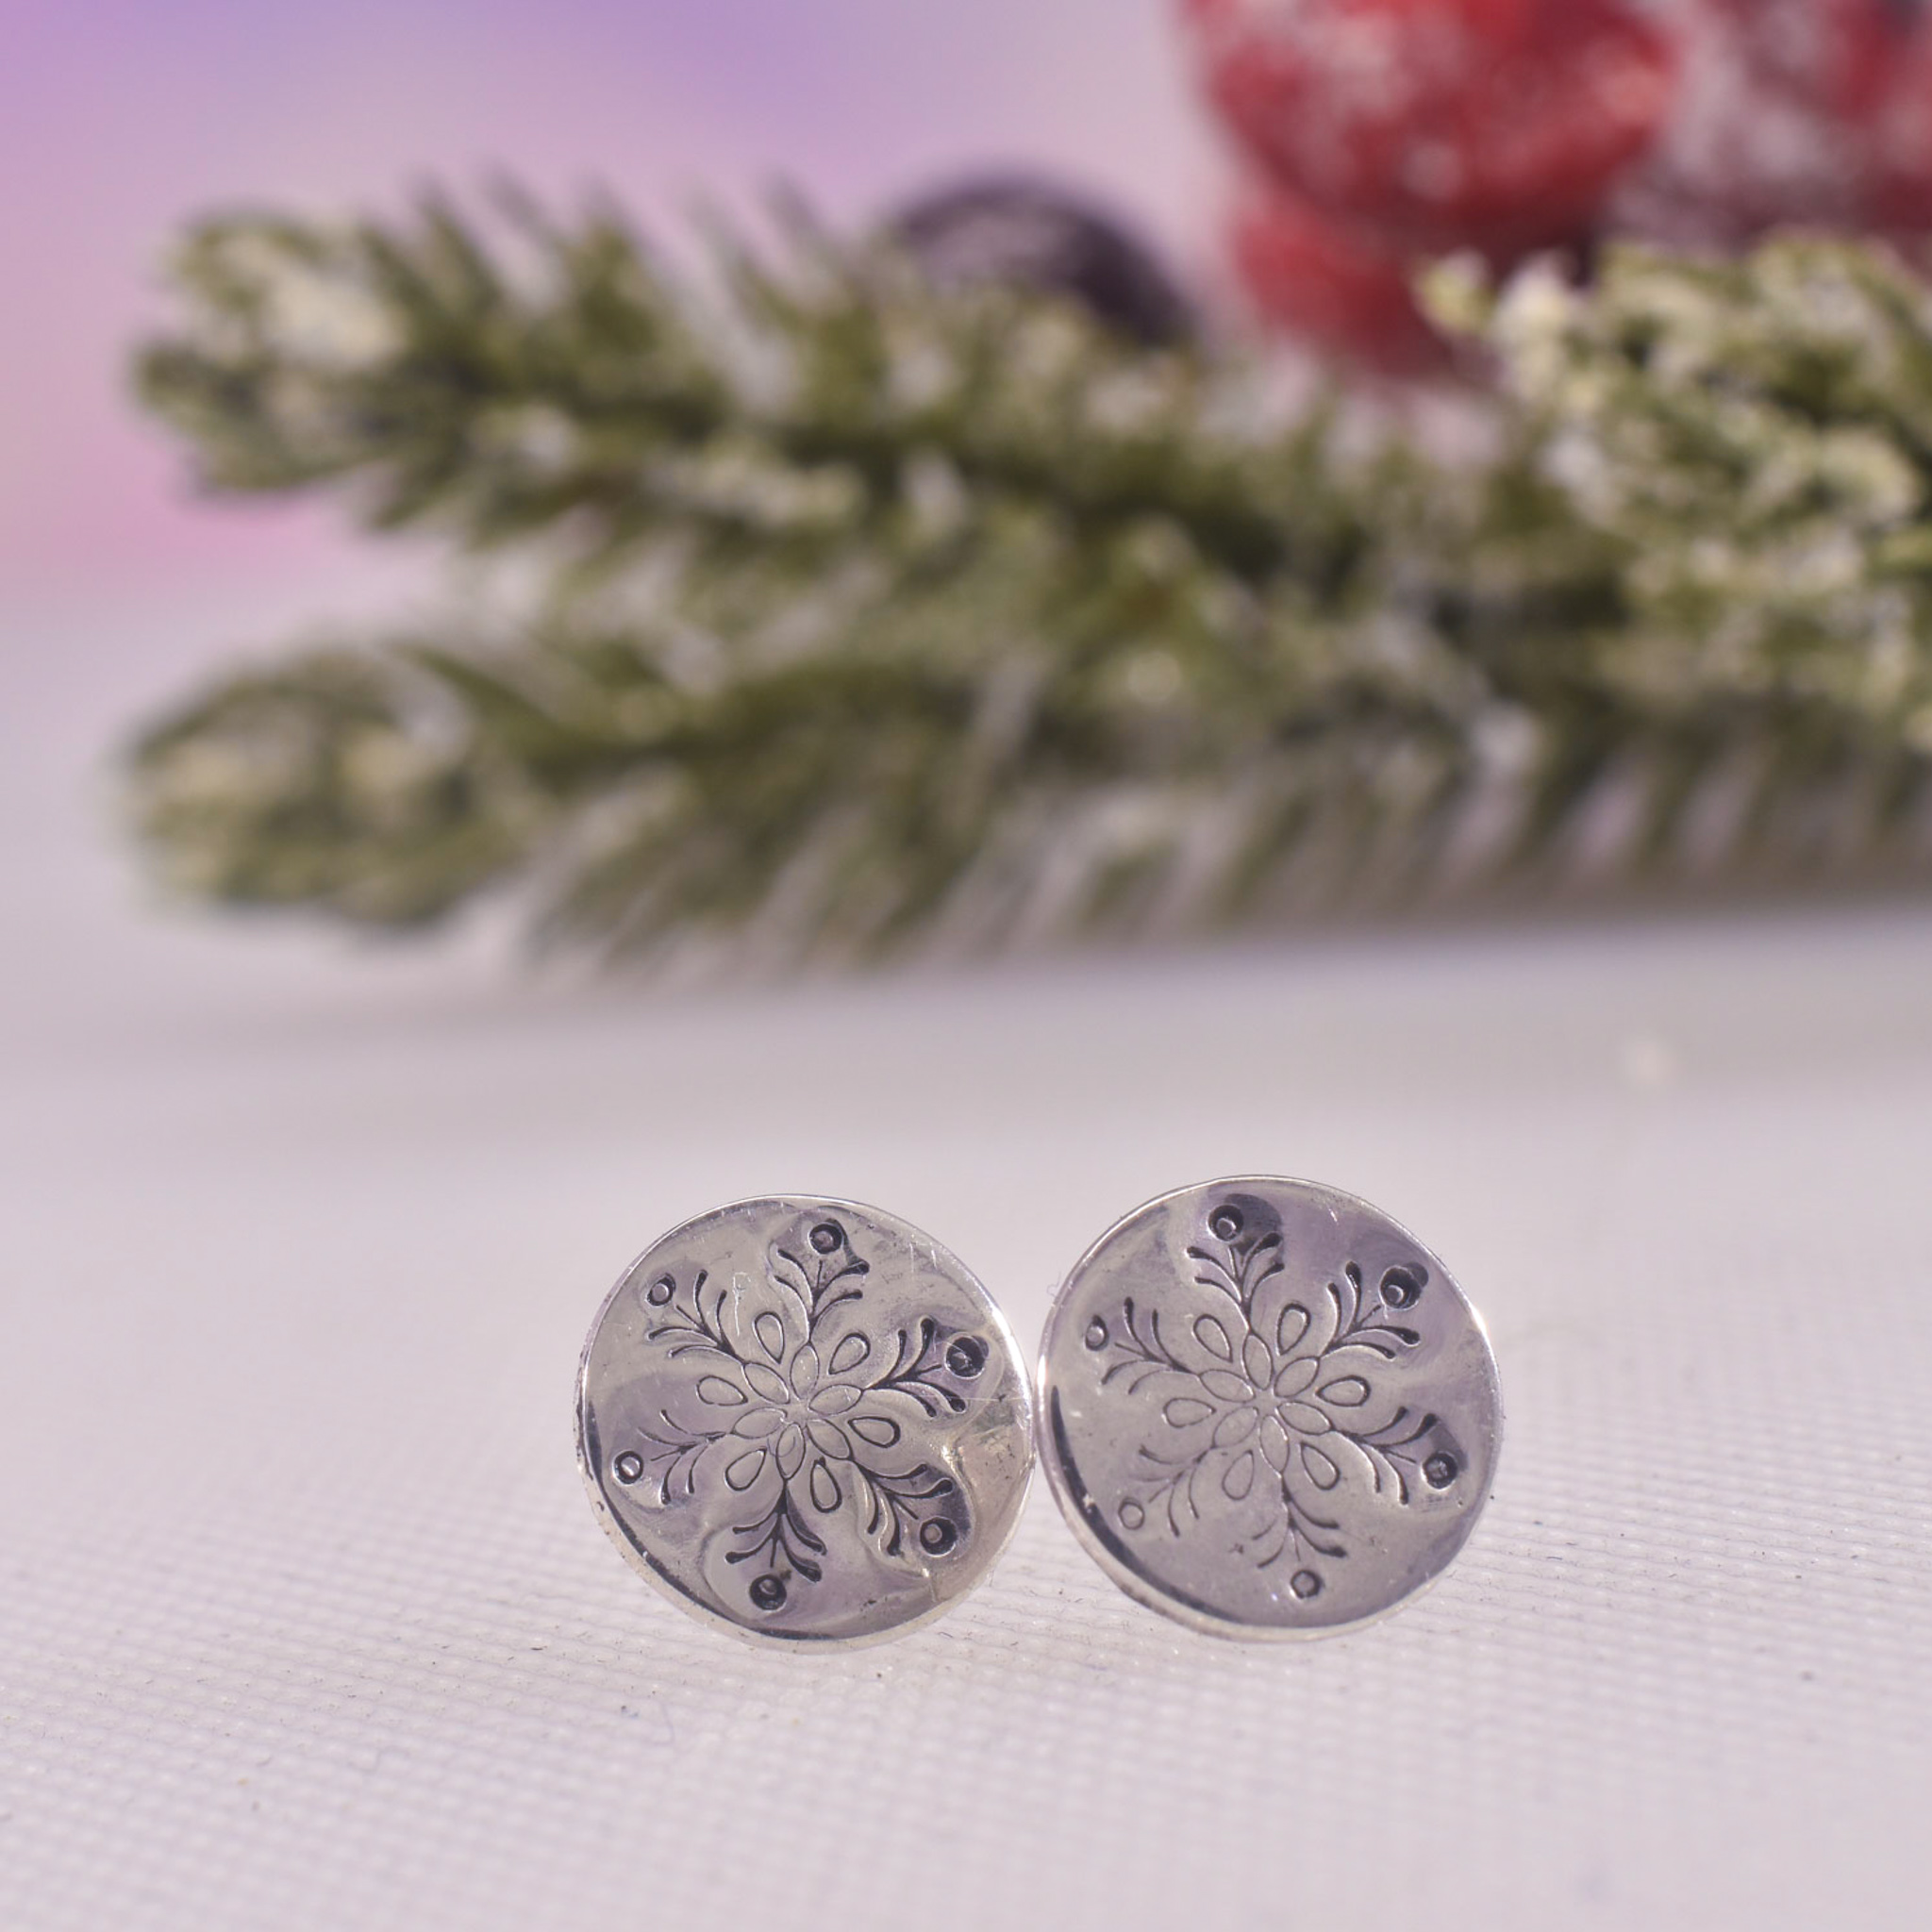 Silver disc earrings with intricate snowflake design highlighted in black enamel